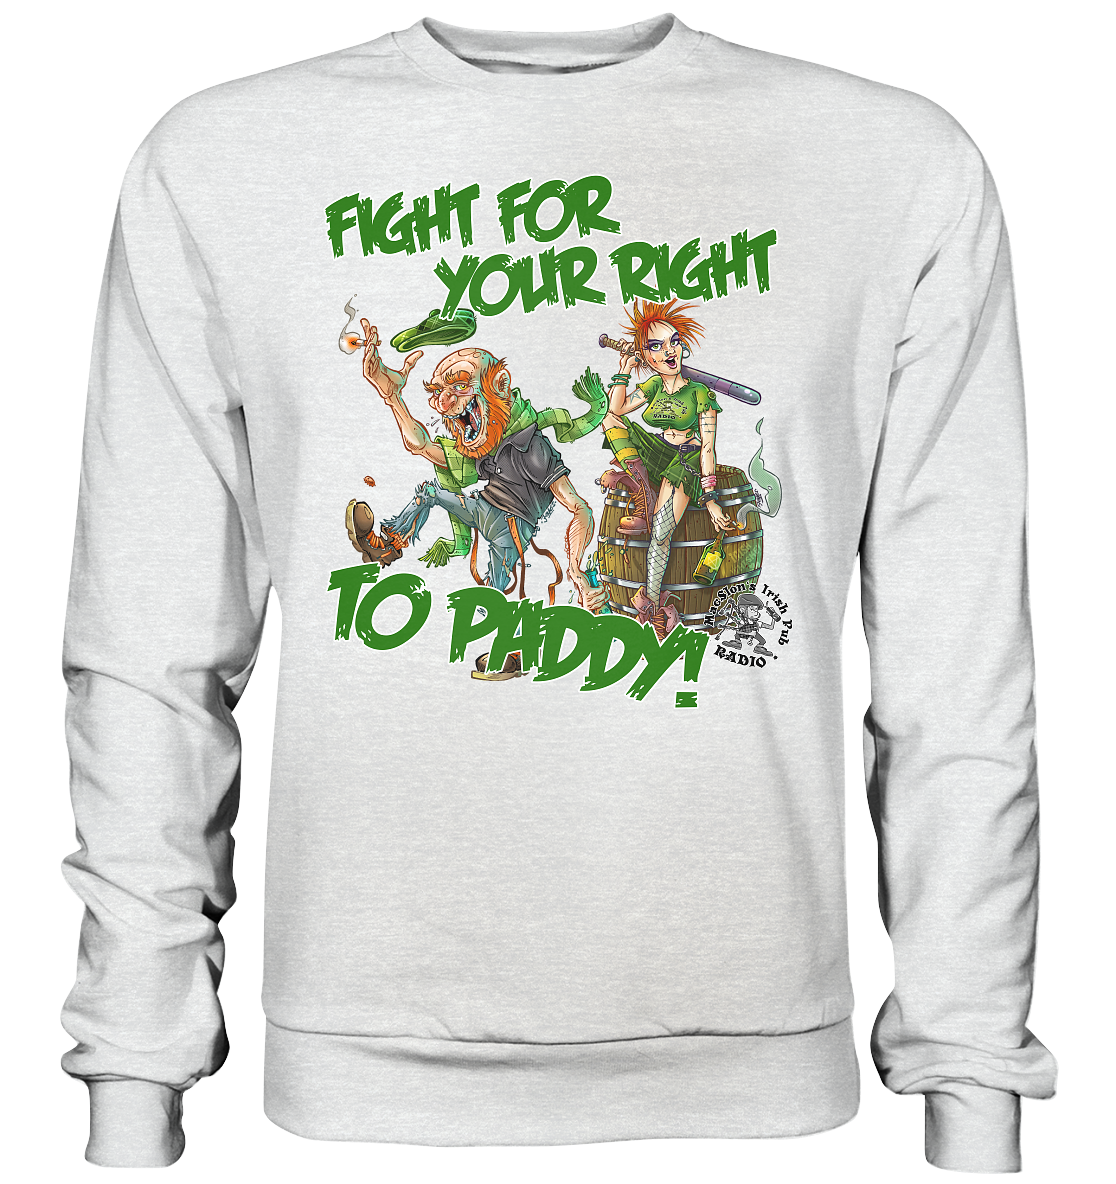 Fight For Your Right To Paddy - Premium Sweatshirt